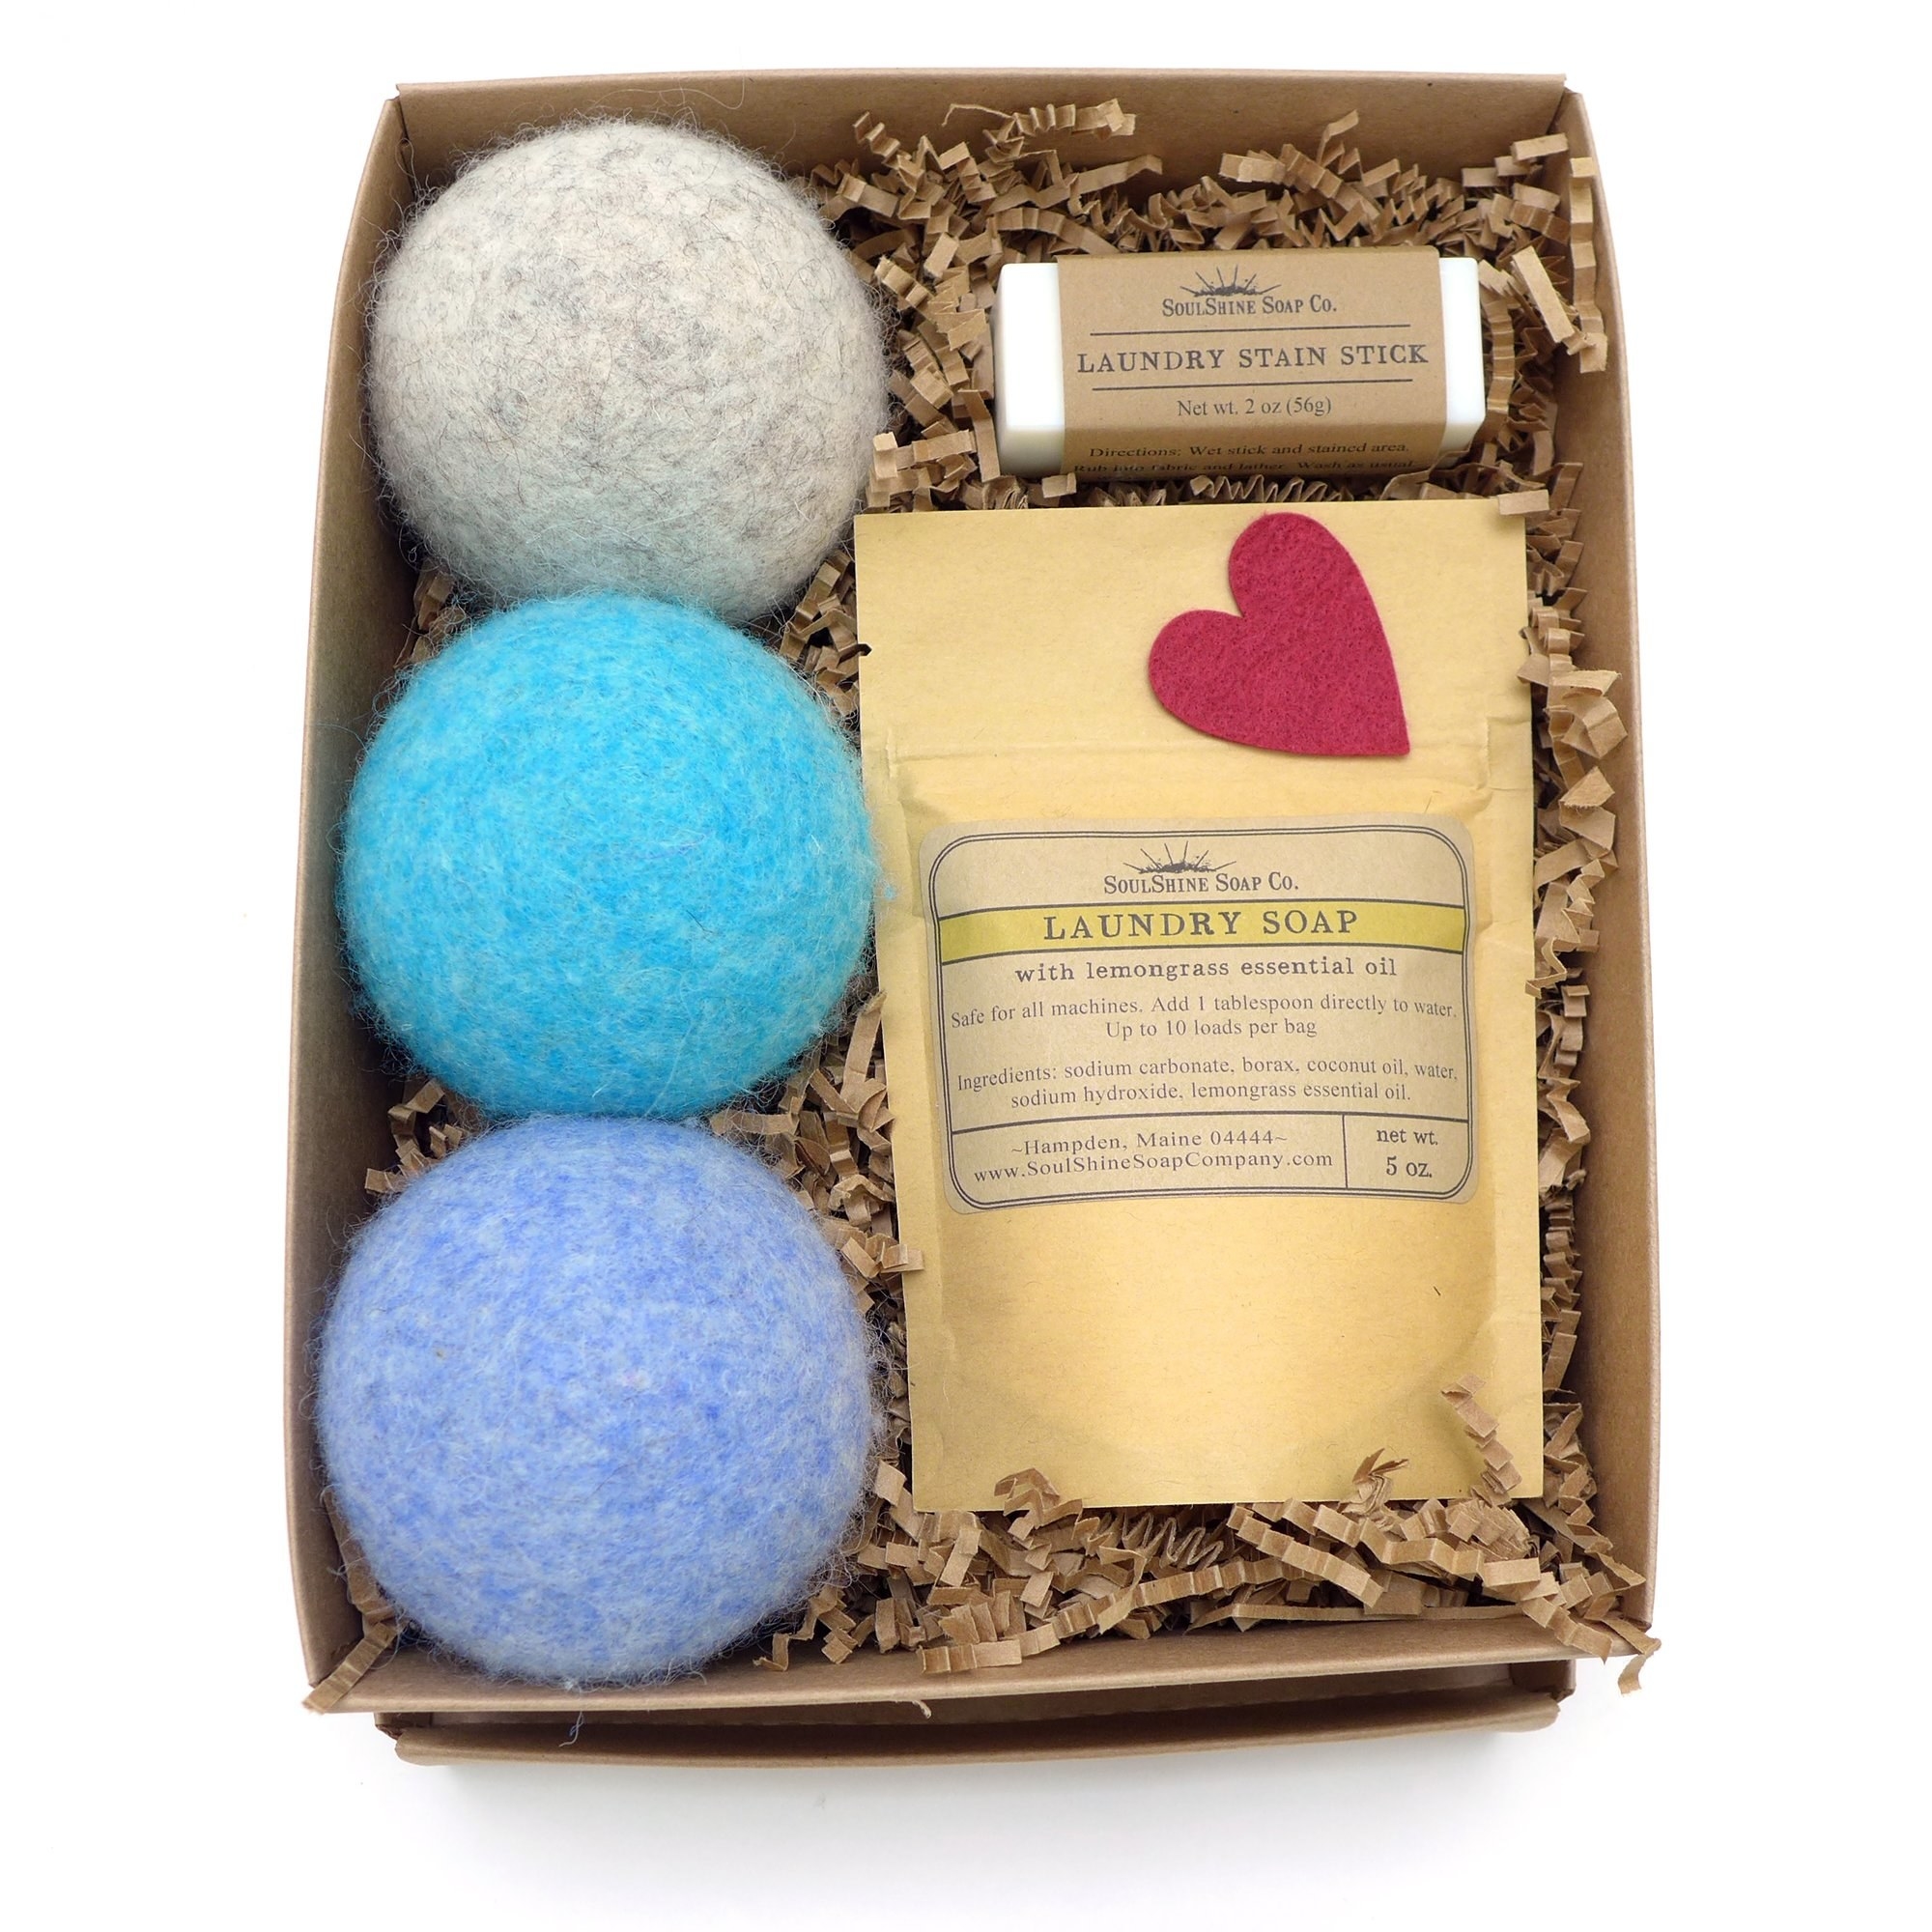 The gift box with gray, blue, and bright blue dryer balls, the soap, and the stain stick